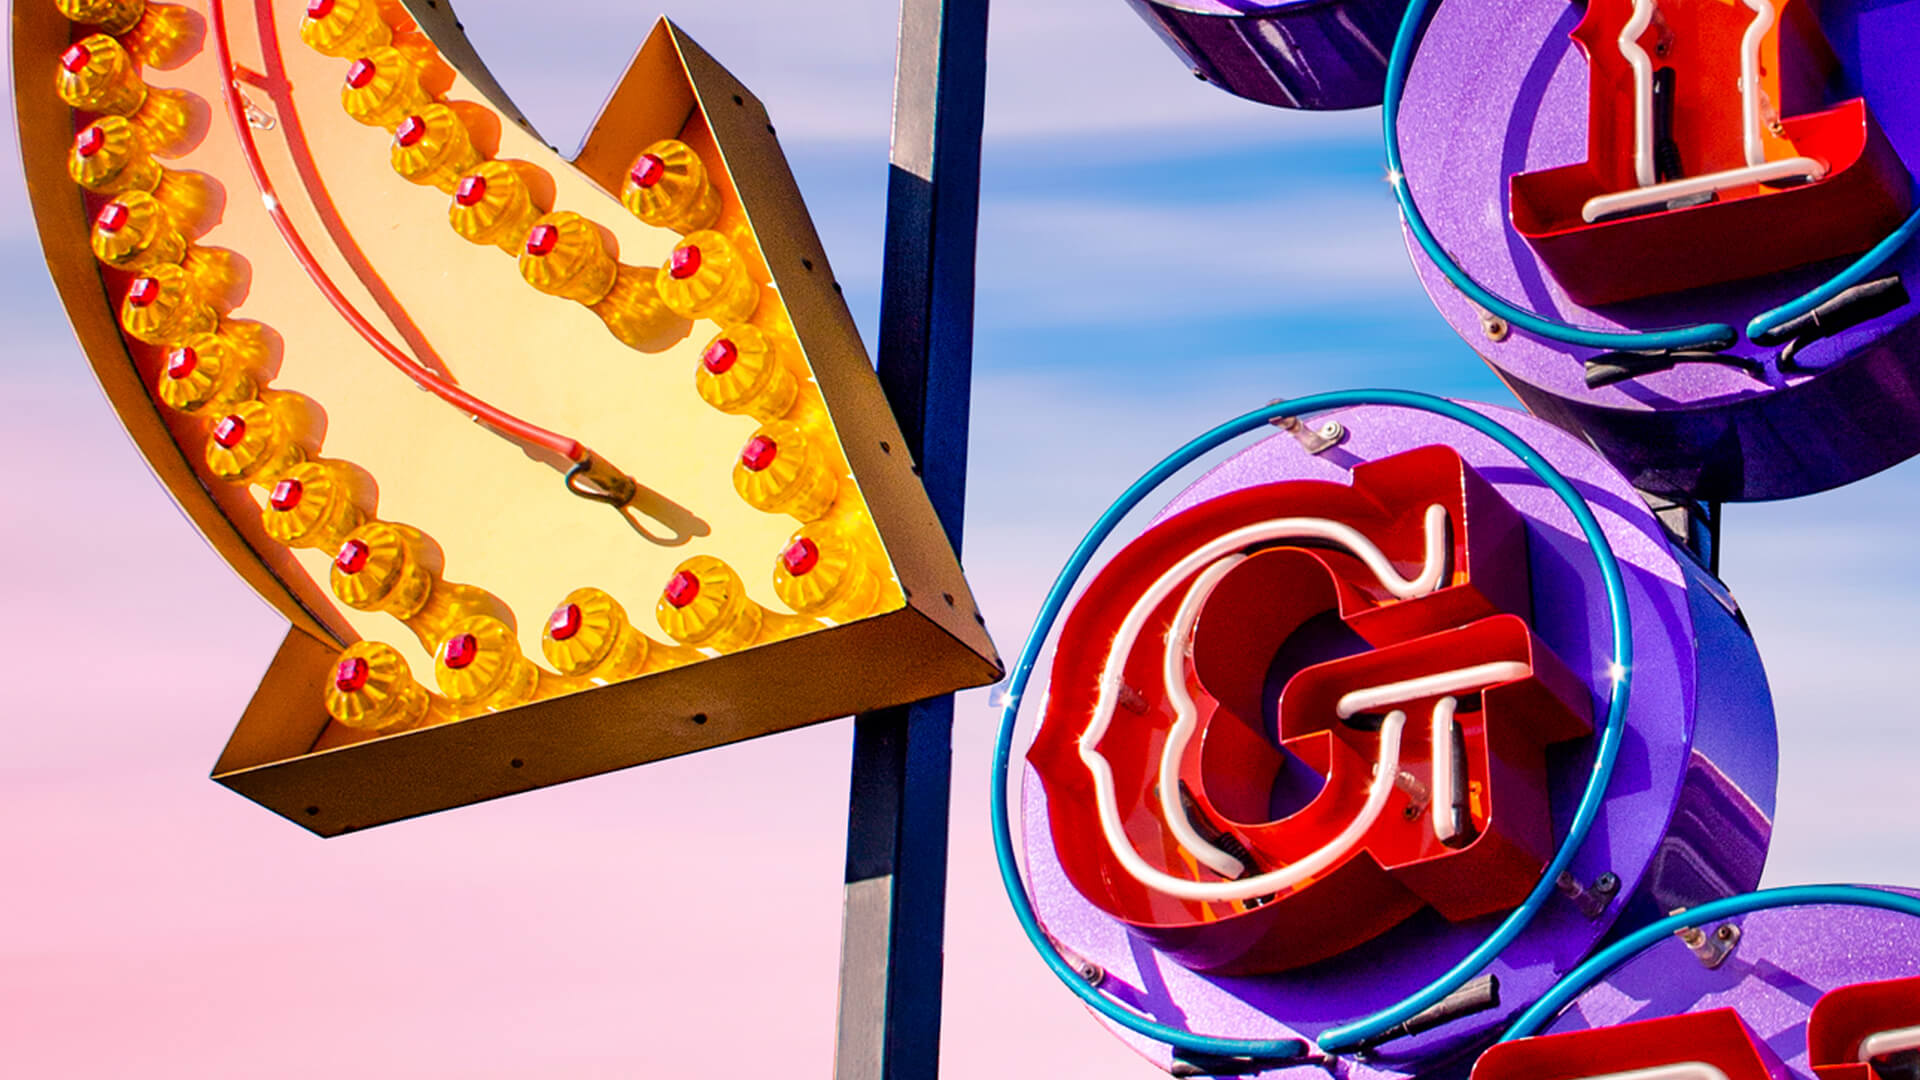 Neon Signs - Arrow illuminated by light bulbs, pointing to the letter G of Signs